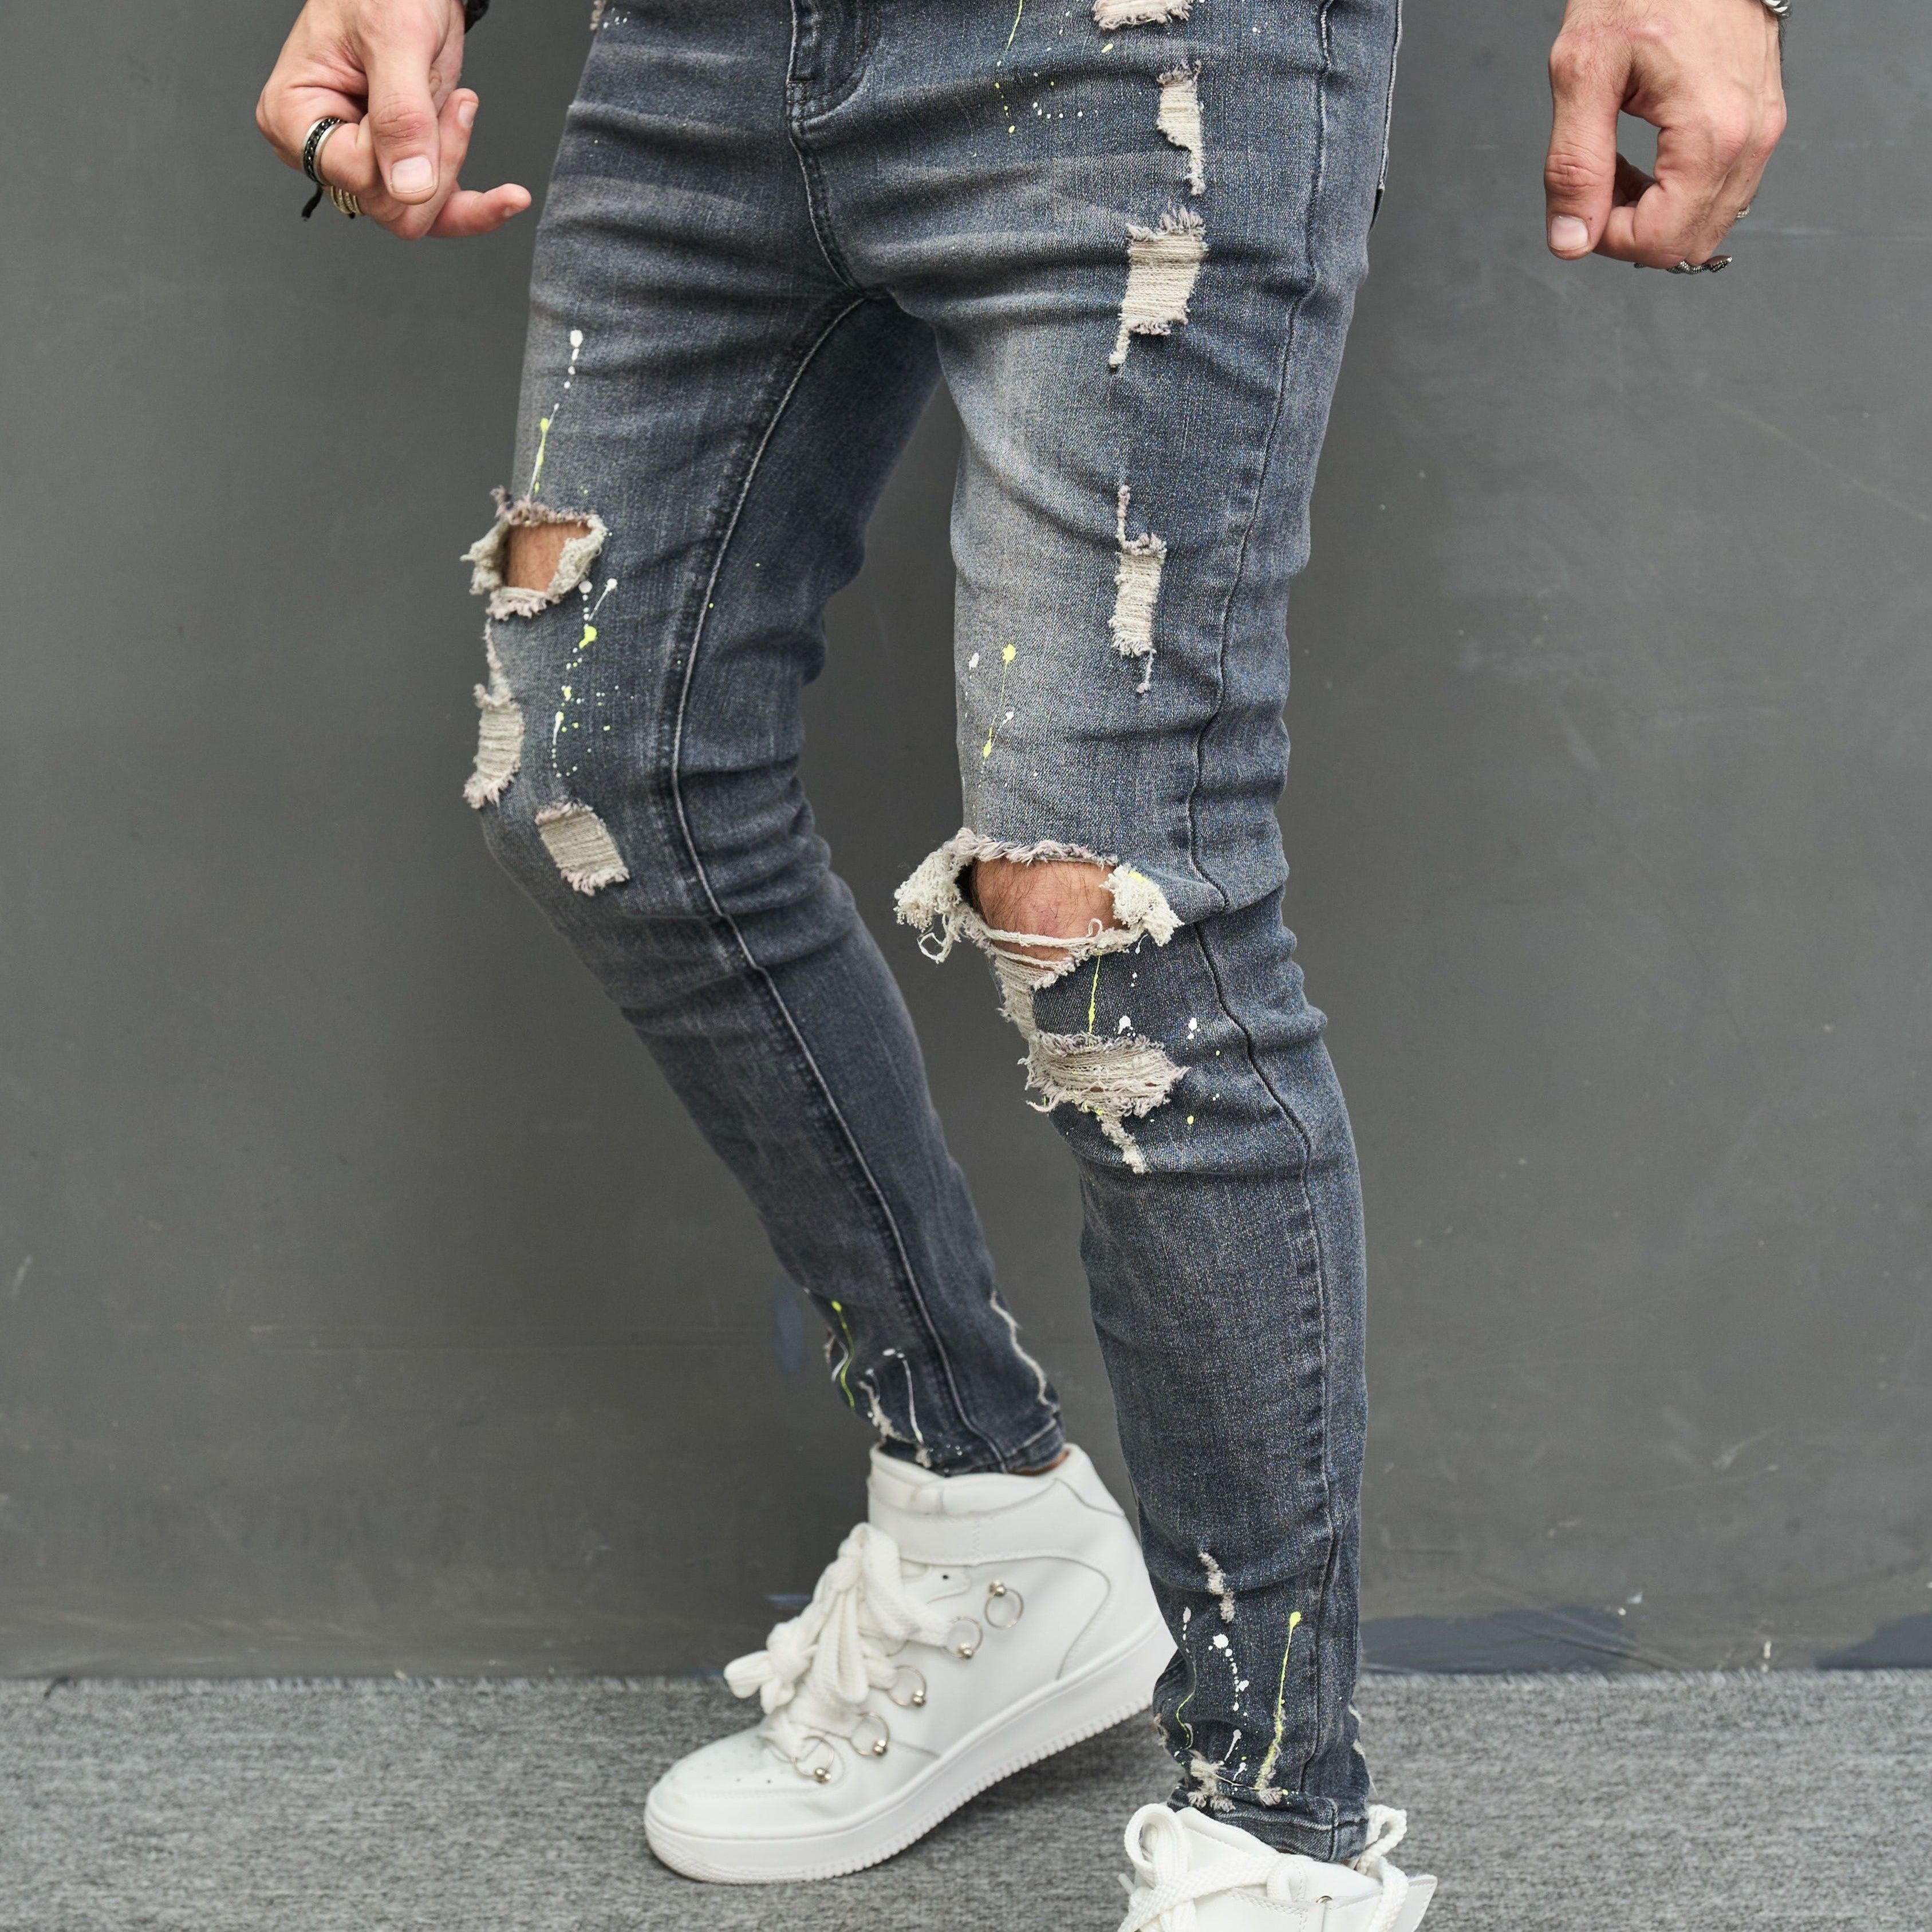 

Men's Cotton Blend Ripped Distressed Jeans, Chic Street Style Slim Fit Bottoms For Men, All Seasons